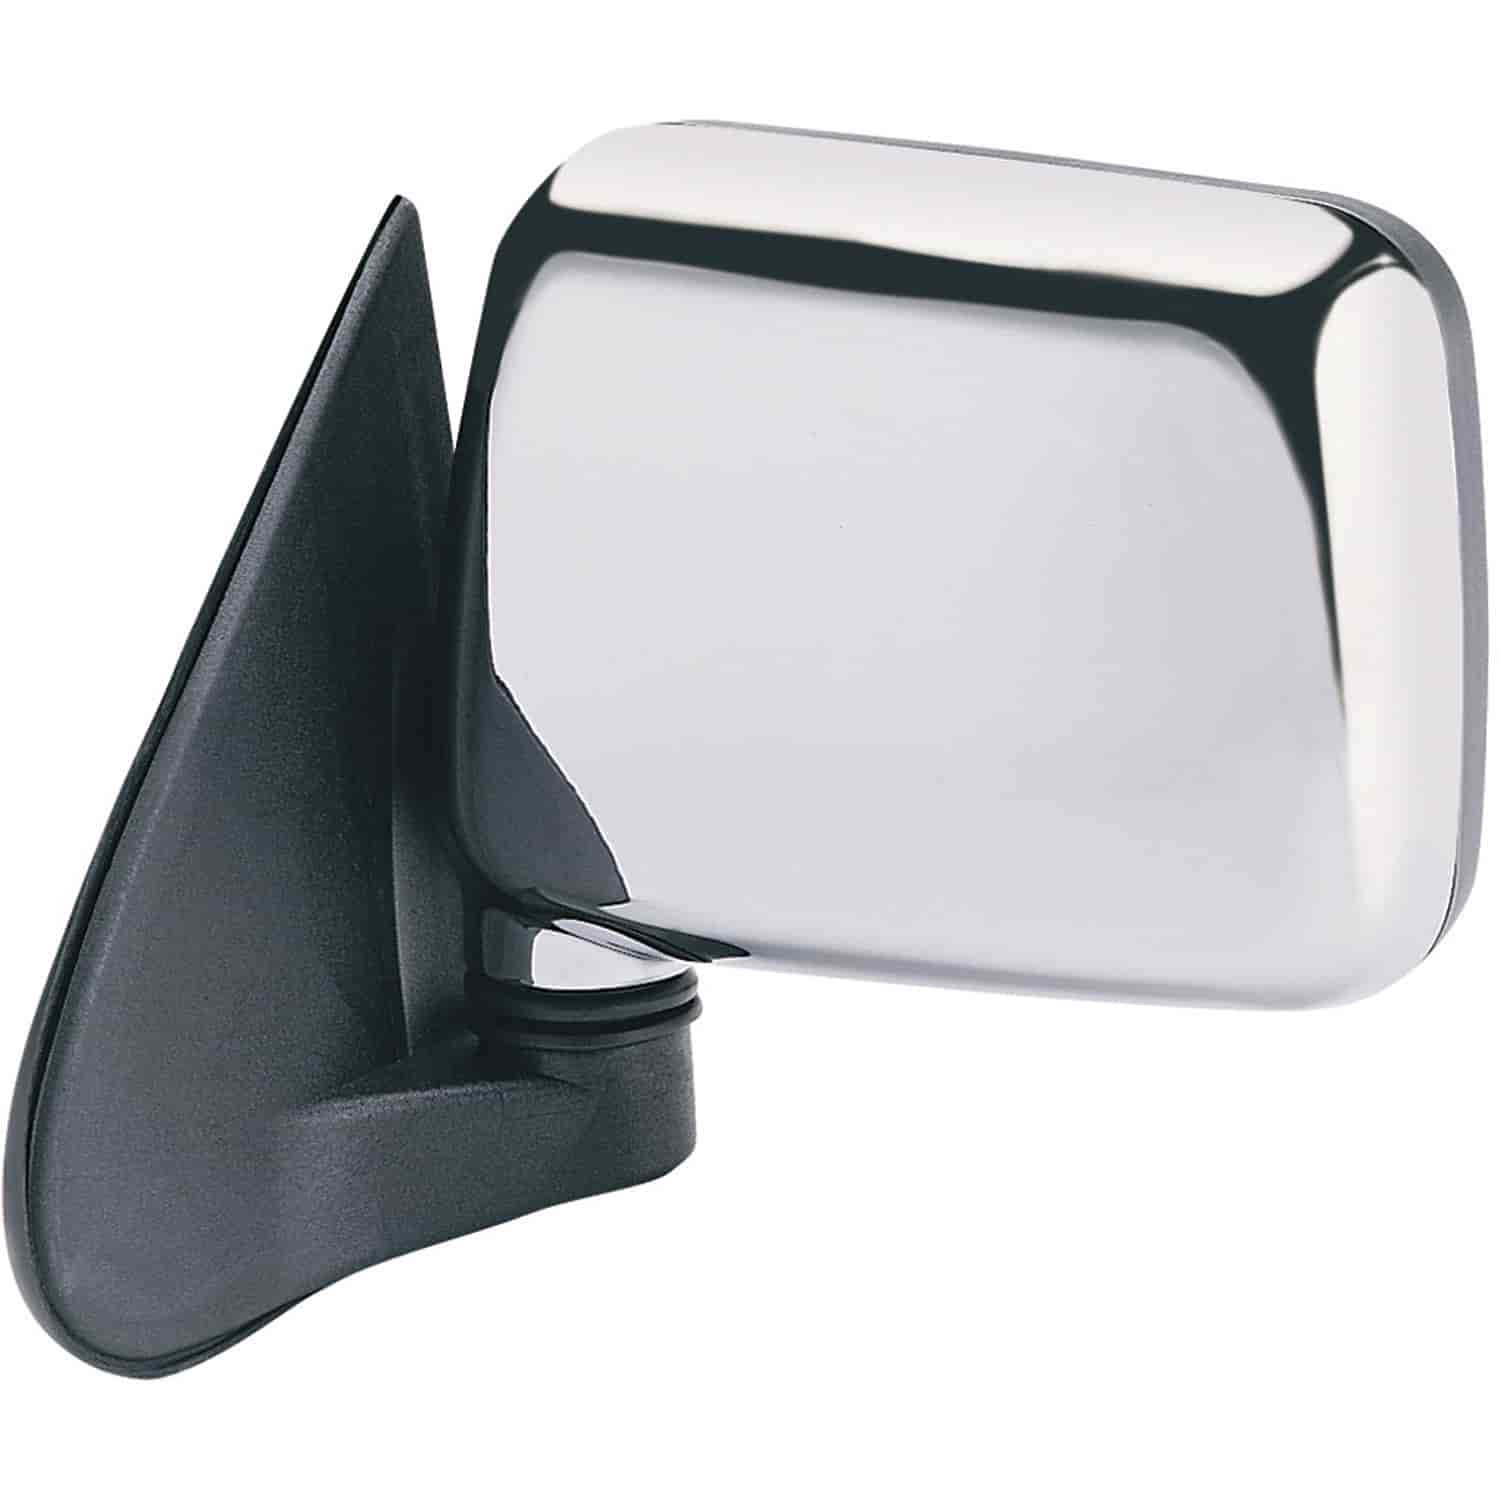 OEM Style Replacement mirror for 94-97 Isuzu Pick-Up US built; Isuzu Rodeo driver side mirror tested